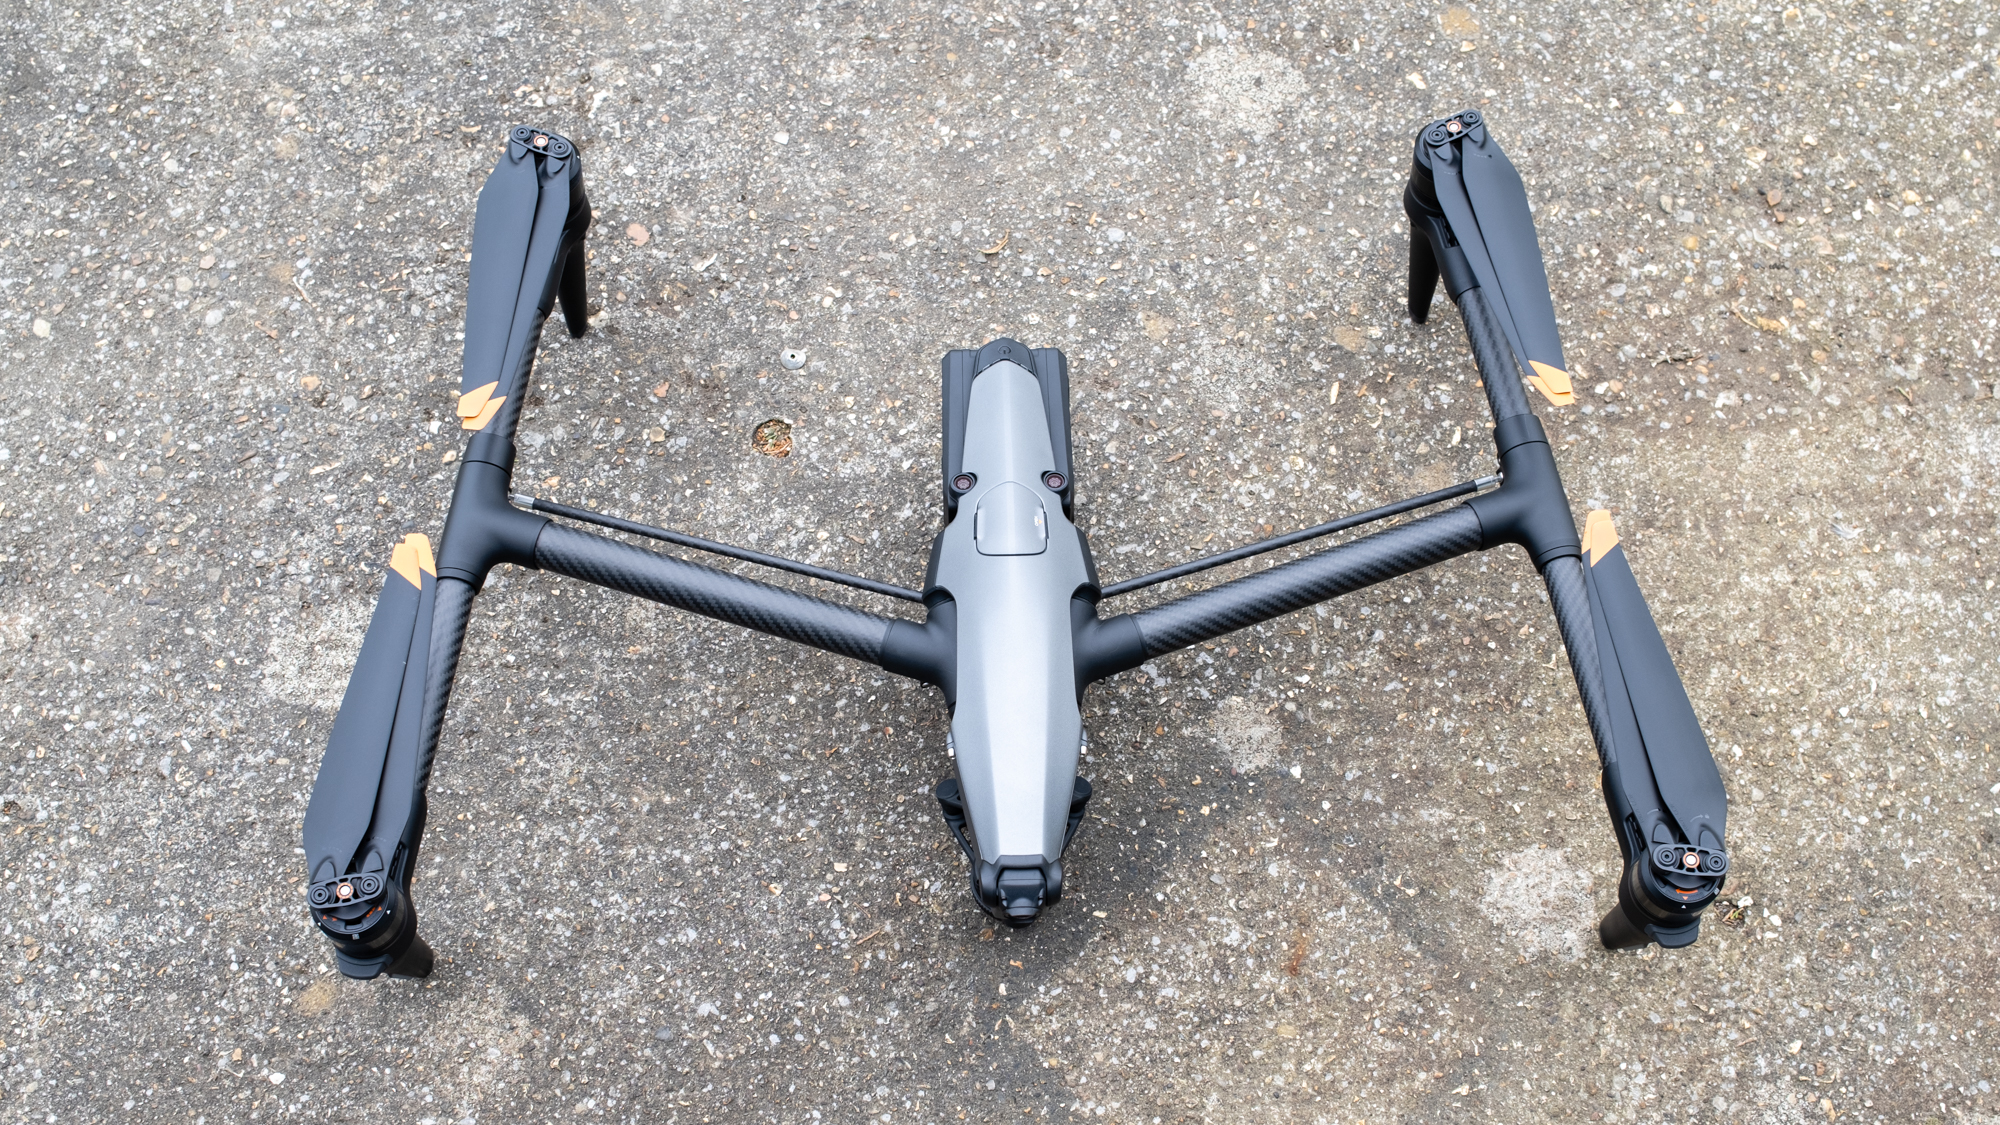 DJI Inspire 3 drone on the ground ready to fly